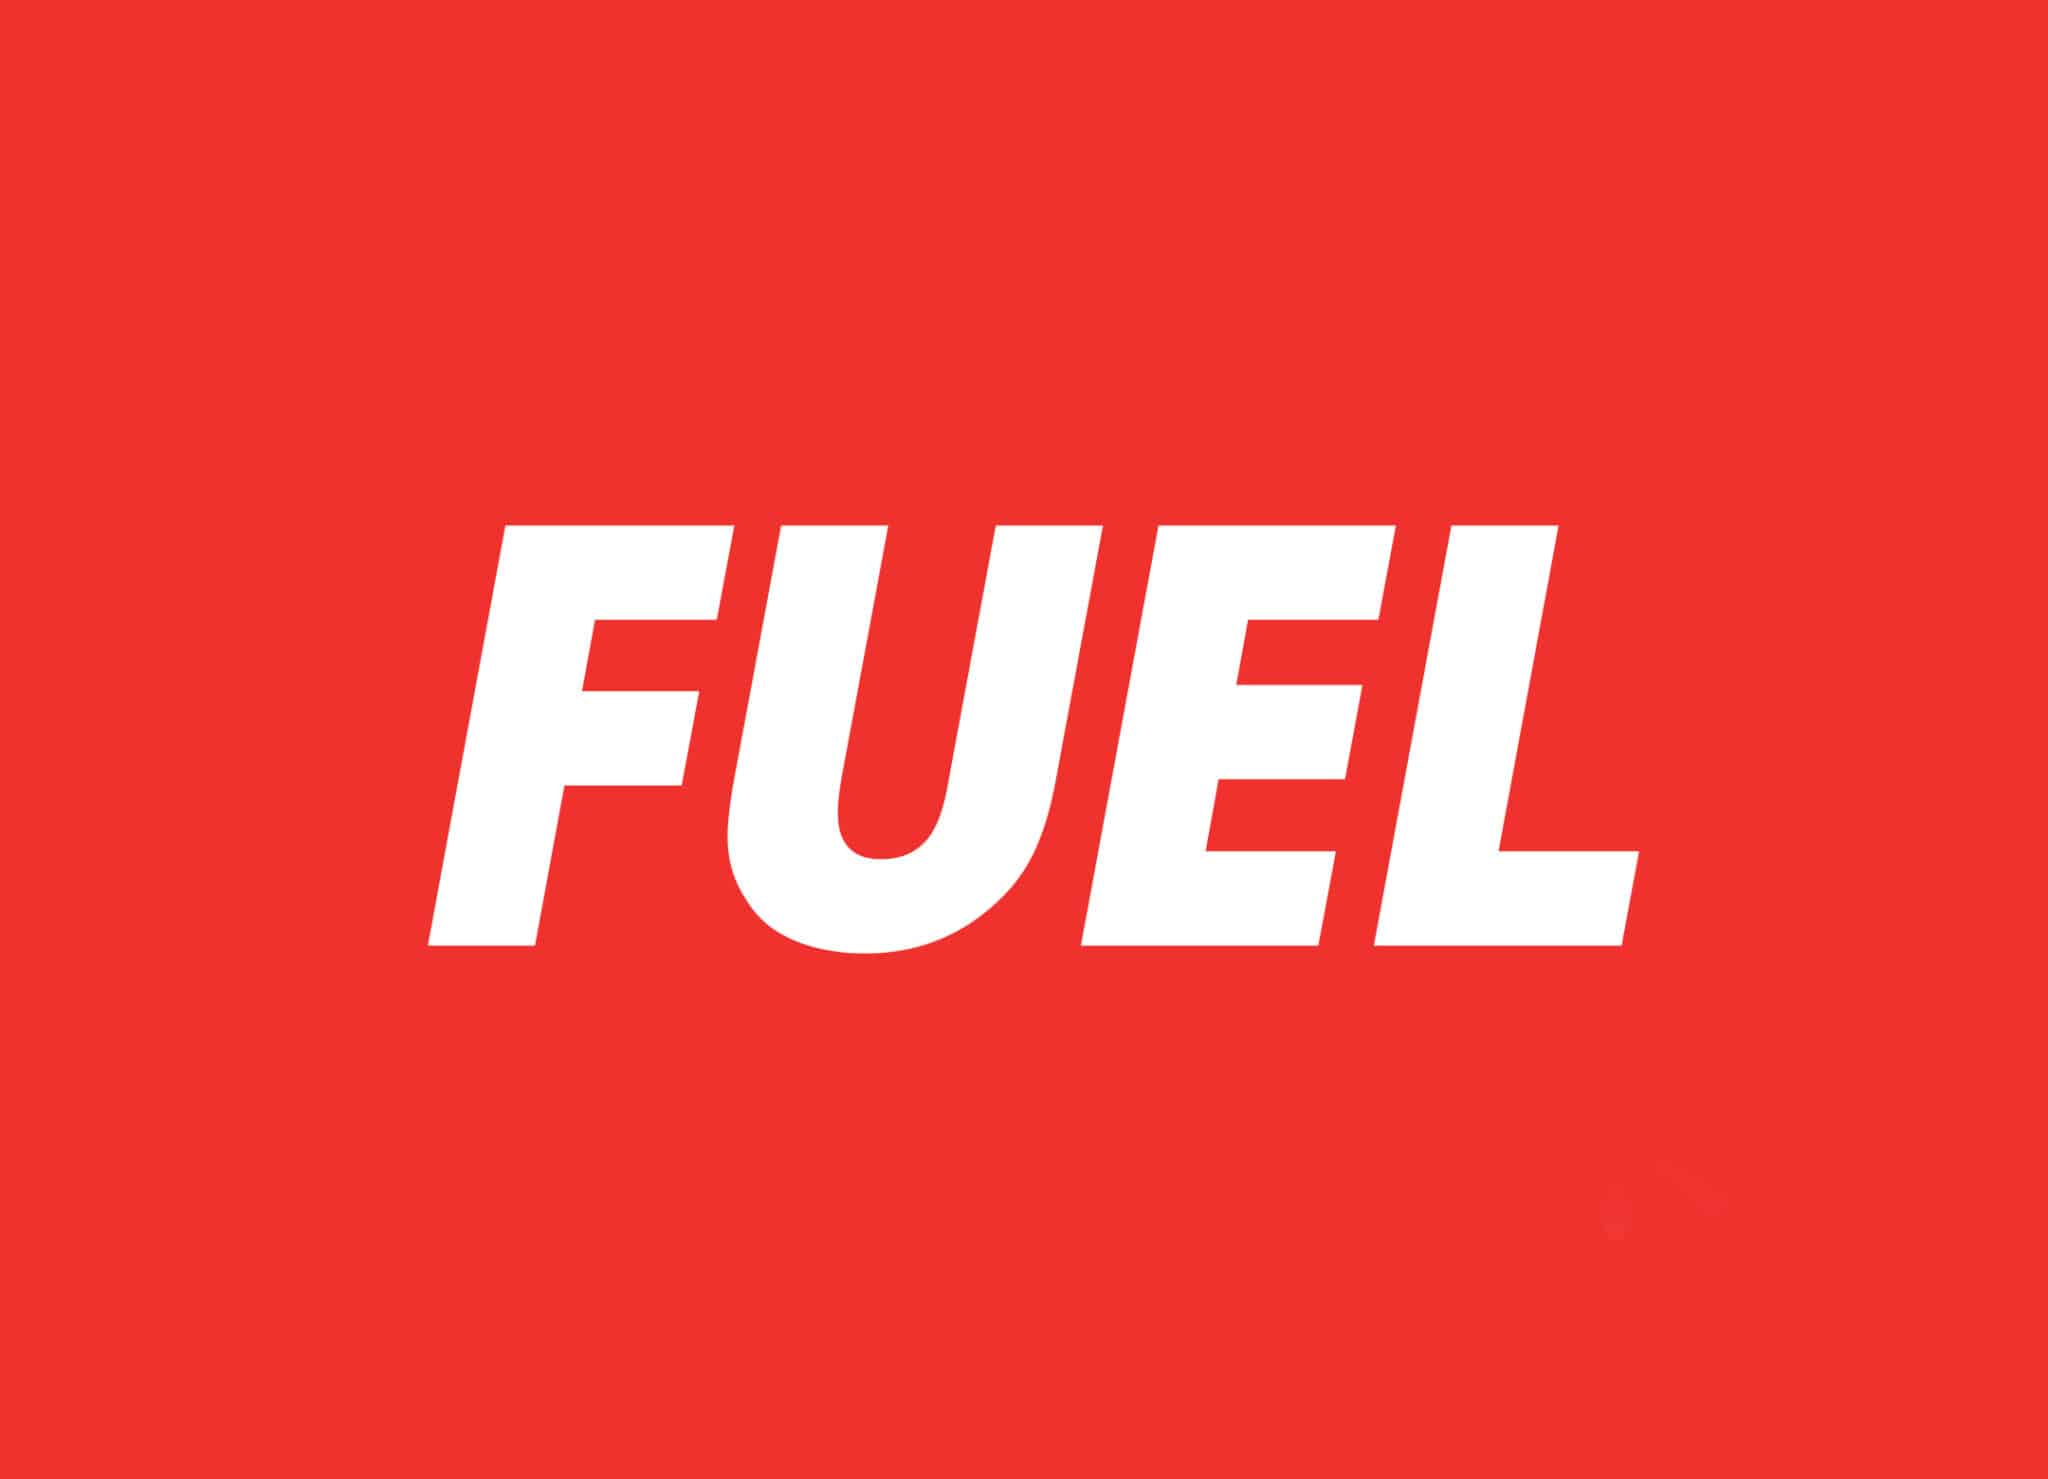 FUEL – Your Marketing Agency in Greenville, SC